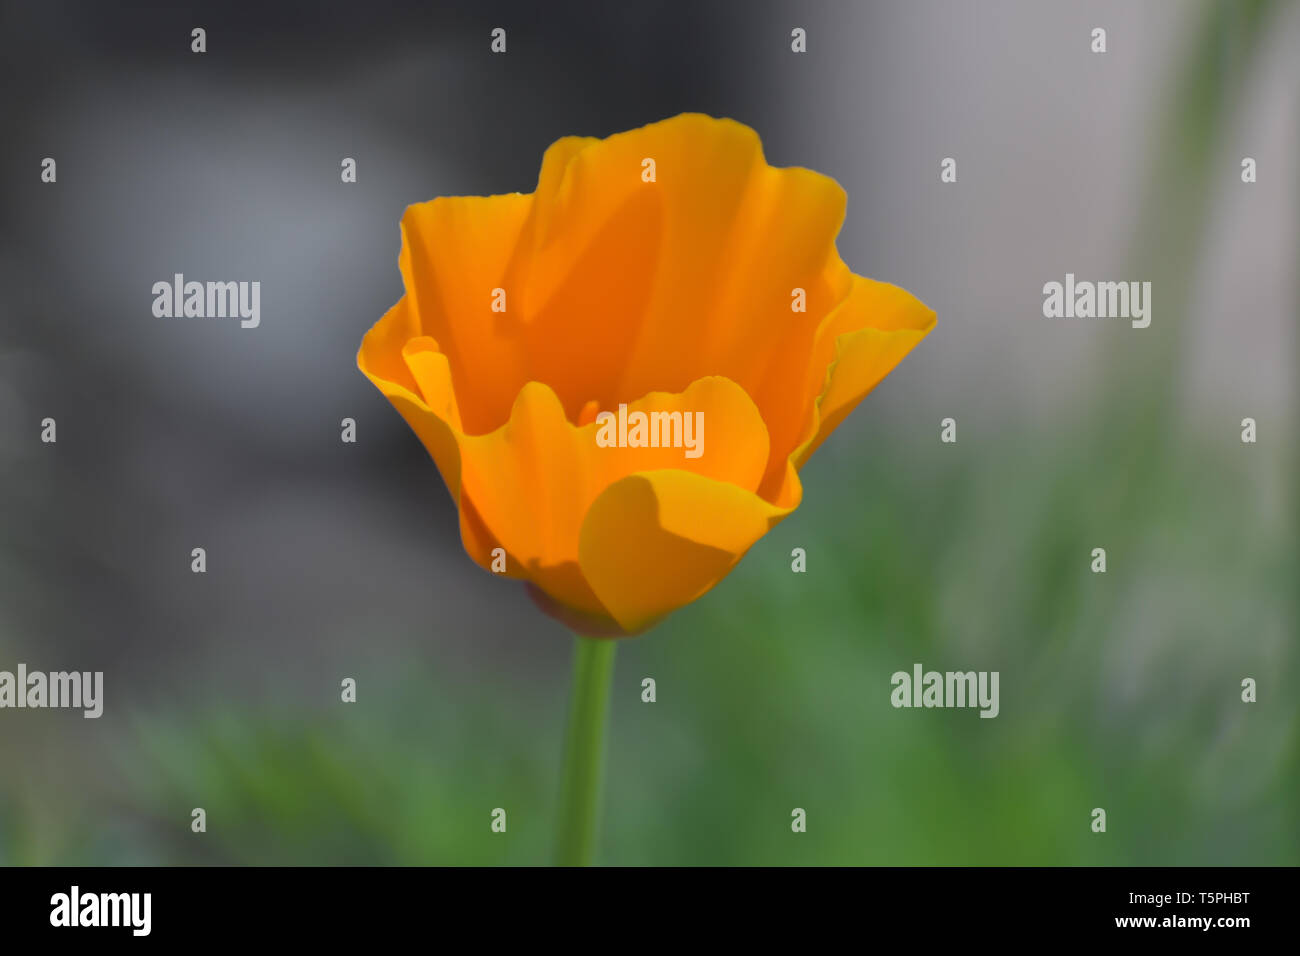 Close-up of a beautiful orange California poppy with a background blur of green plants. Stock Photo